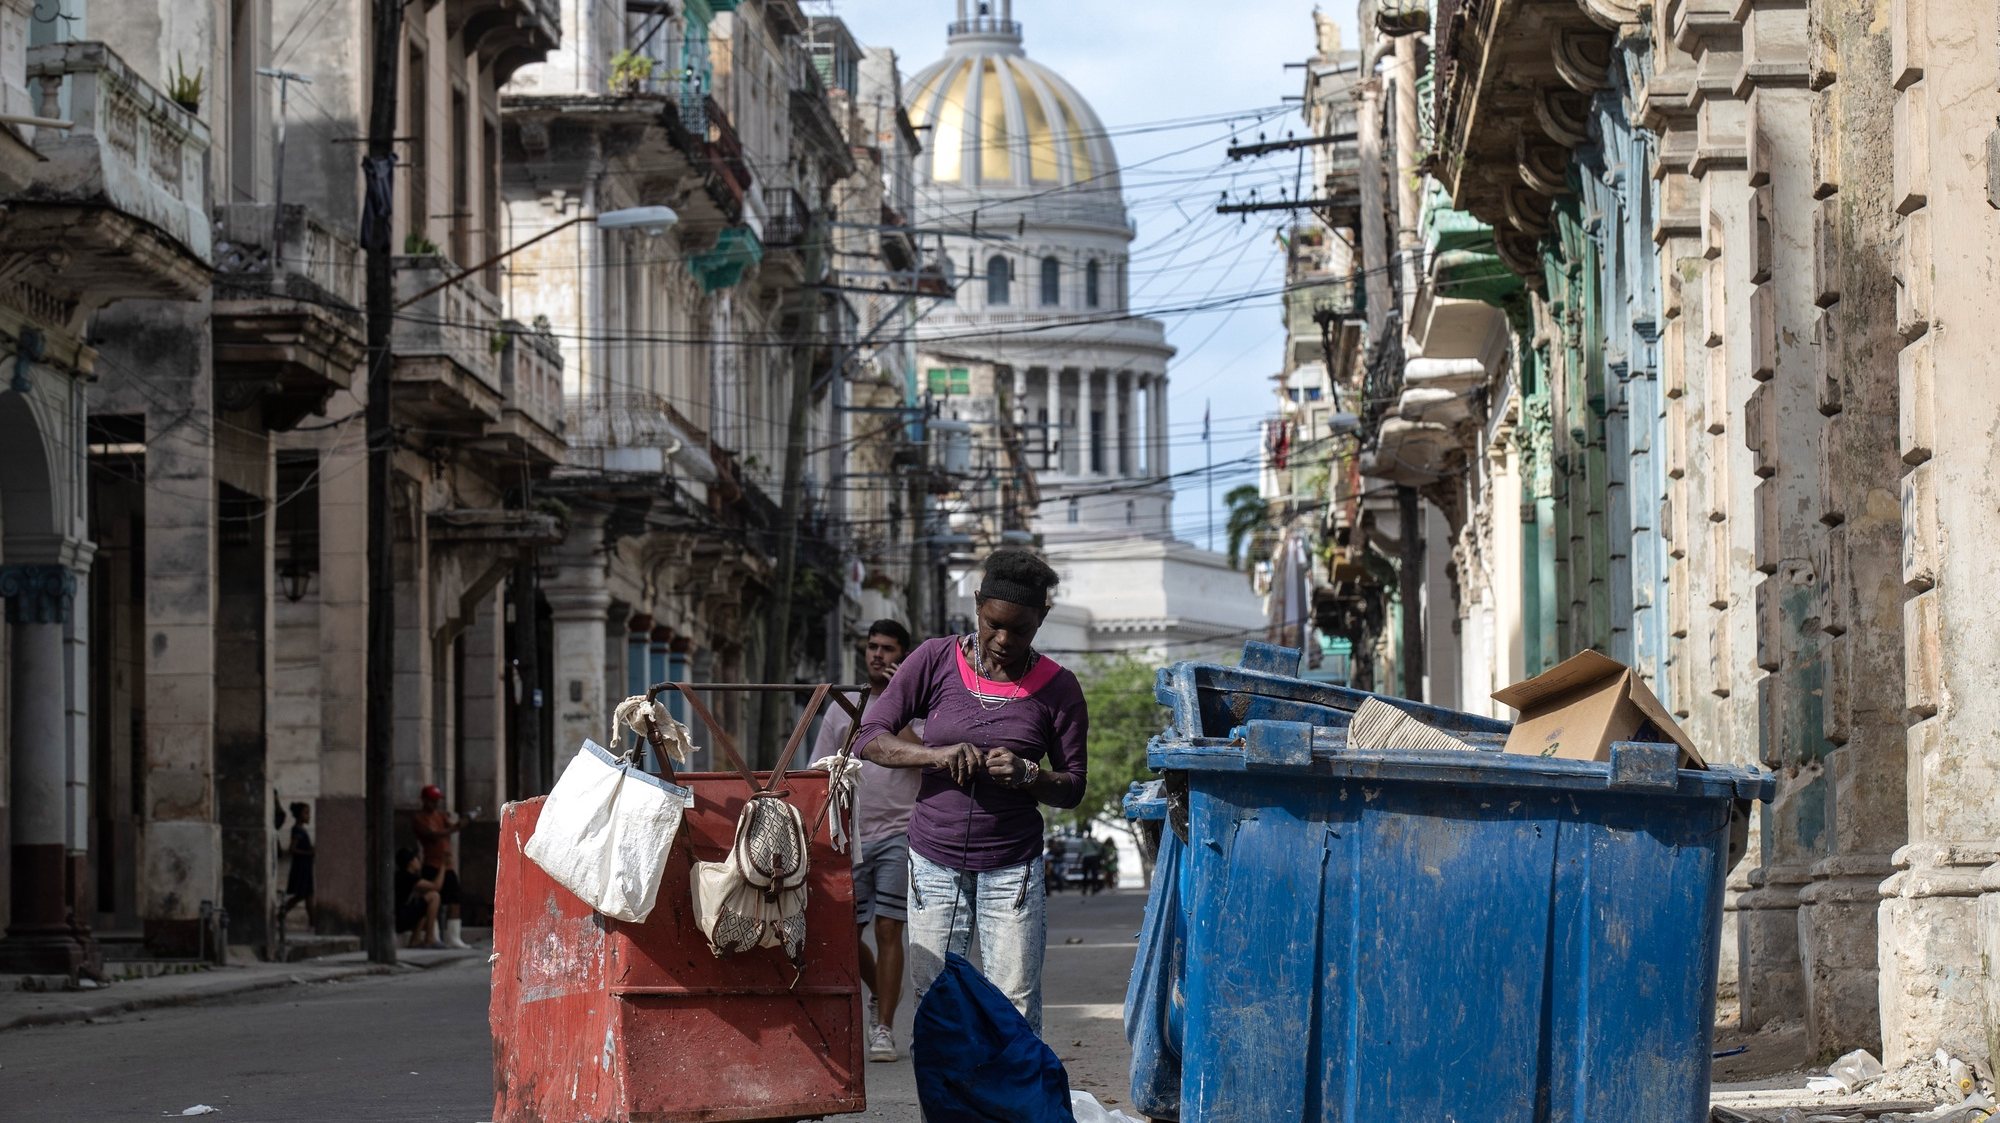 epa11076696 A woman searches through a garbage container a block away from the National Capitol Building in Havana, Cuba, 11 January 2024 (issued 14 January 2024). Divers, locally known as ‘buzos’, searching through garbage tanks are an increasingly common sight in Havana and other Cuban cities, where three years of serious economic crisis are taking a dramatic social toll.  EPA/YANDER ZAMORA